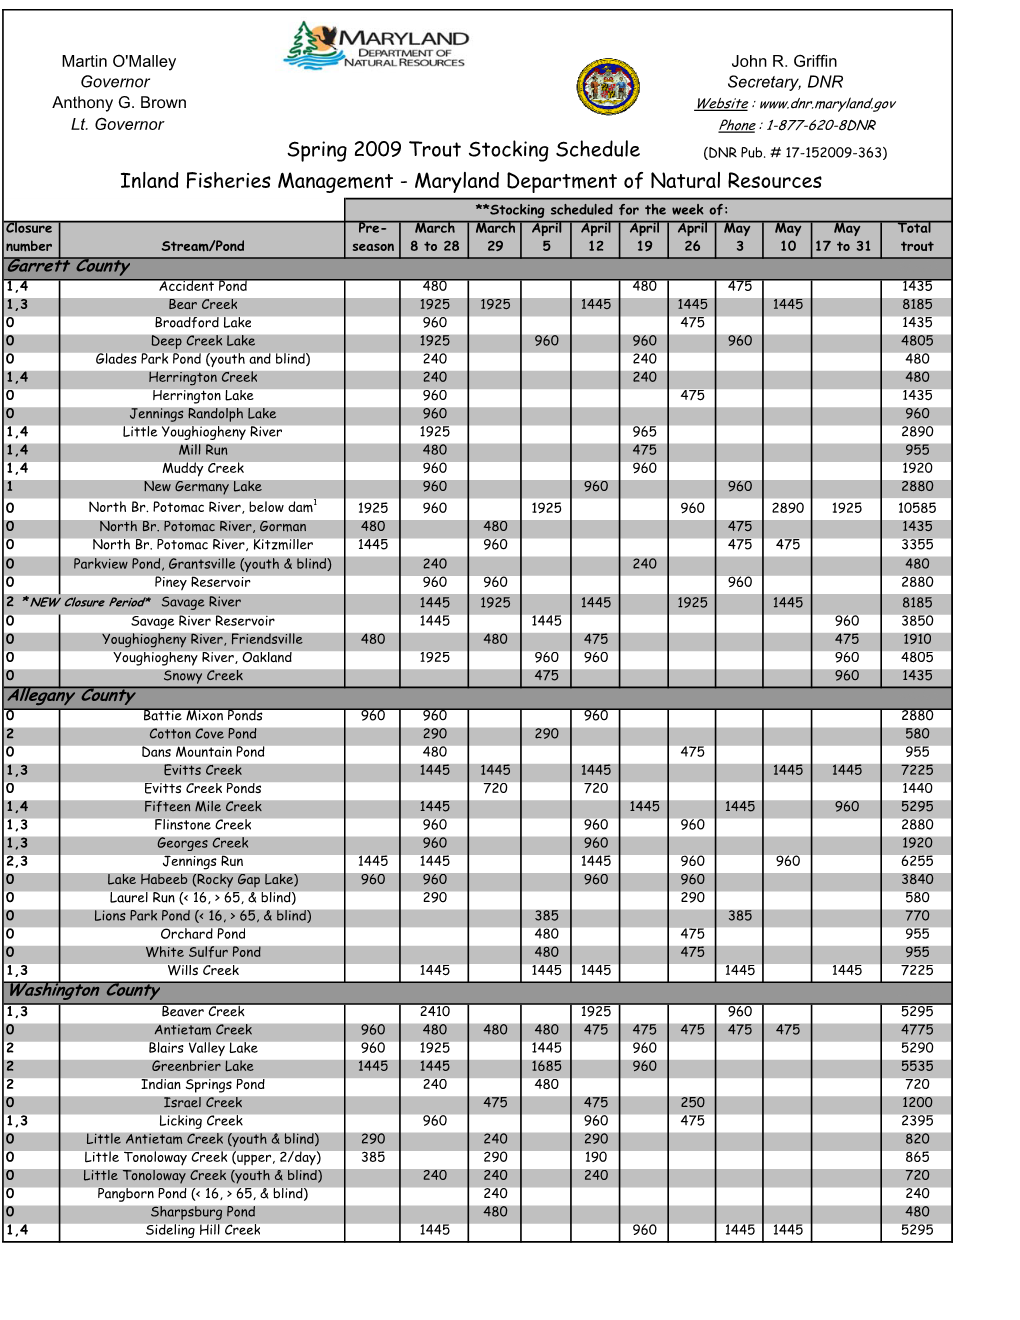 Spring 2009 Trout Stocking Schedule Inland Fisheries